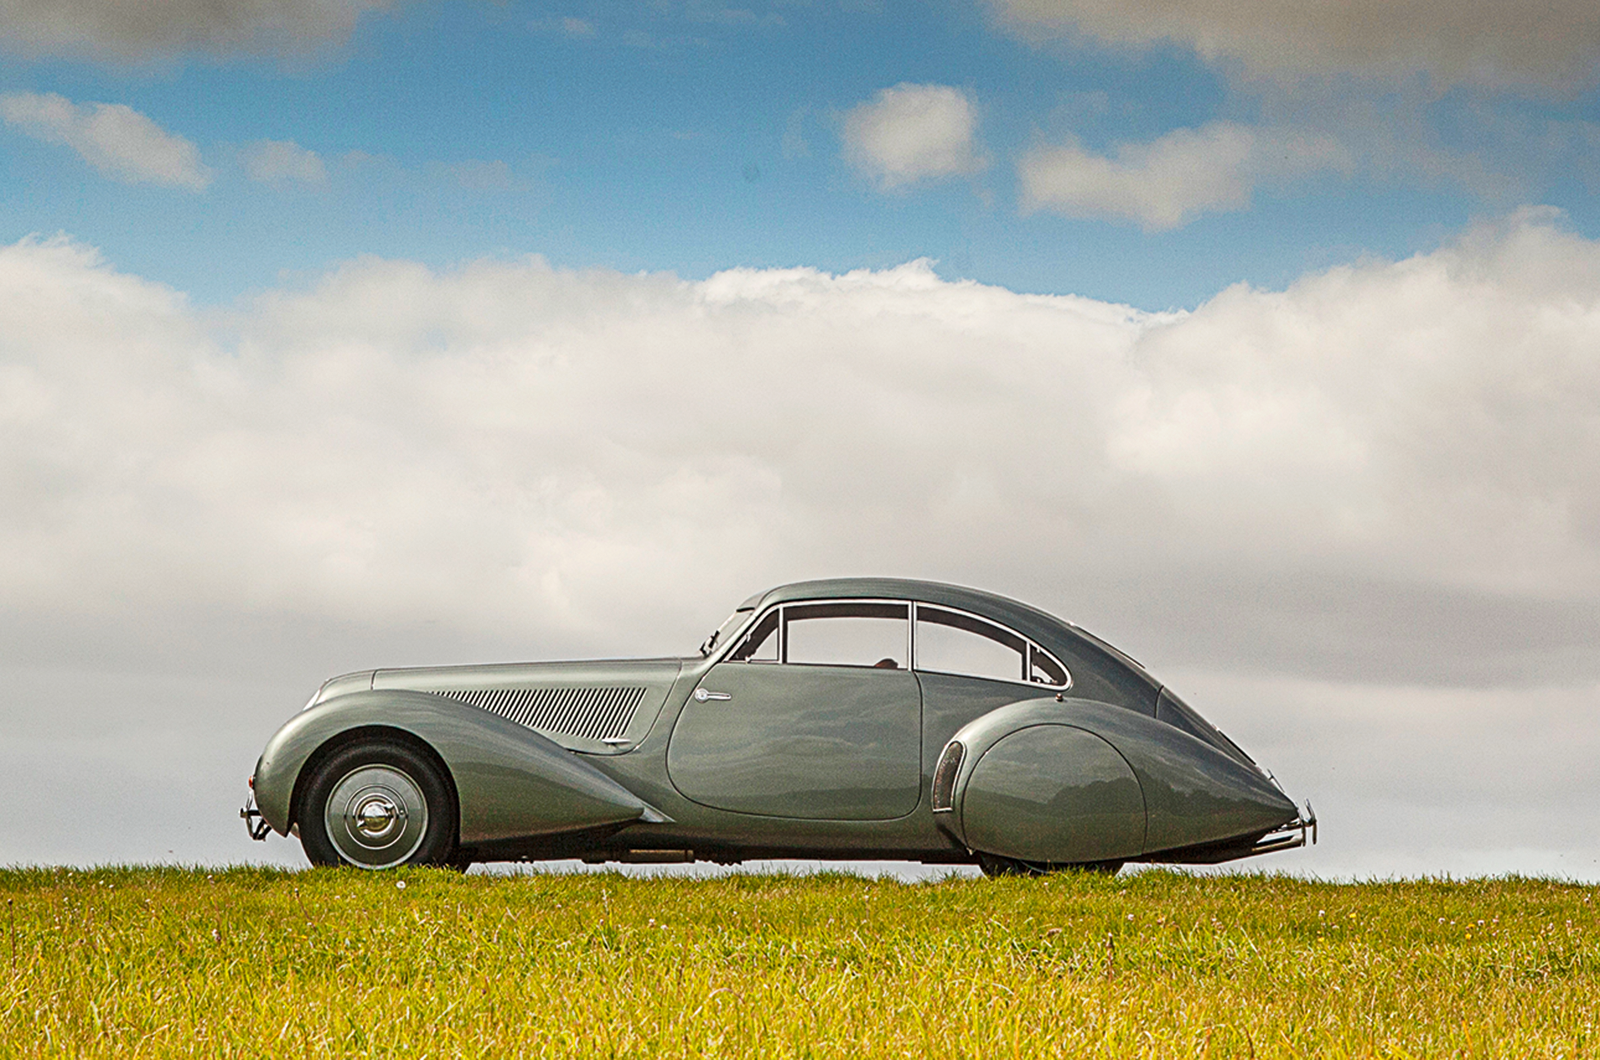 Classic & Sports Car – Embiricos Bentley: from Le Mans races to family holidays